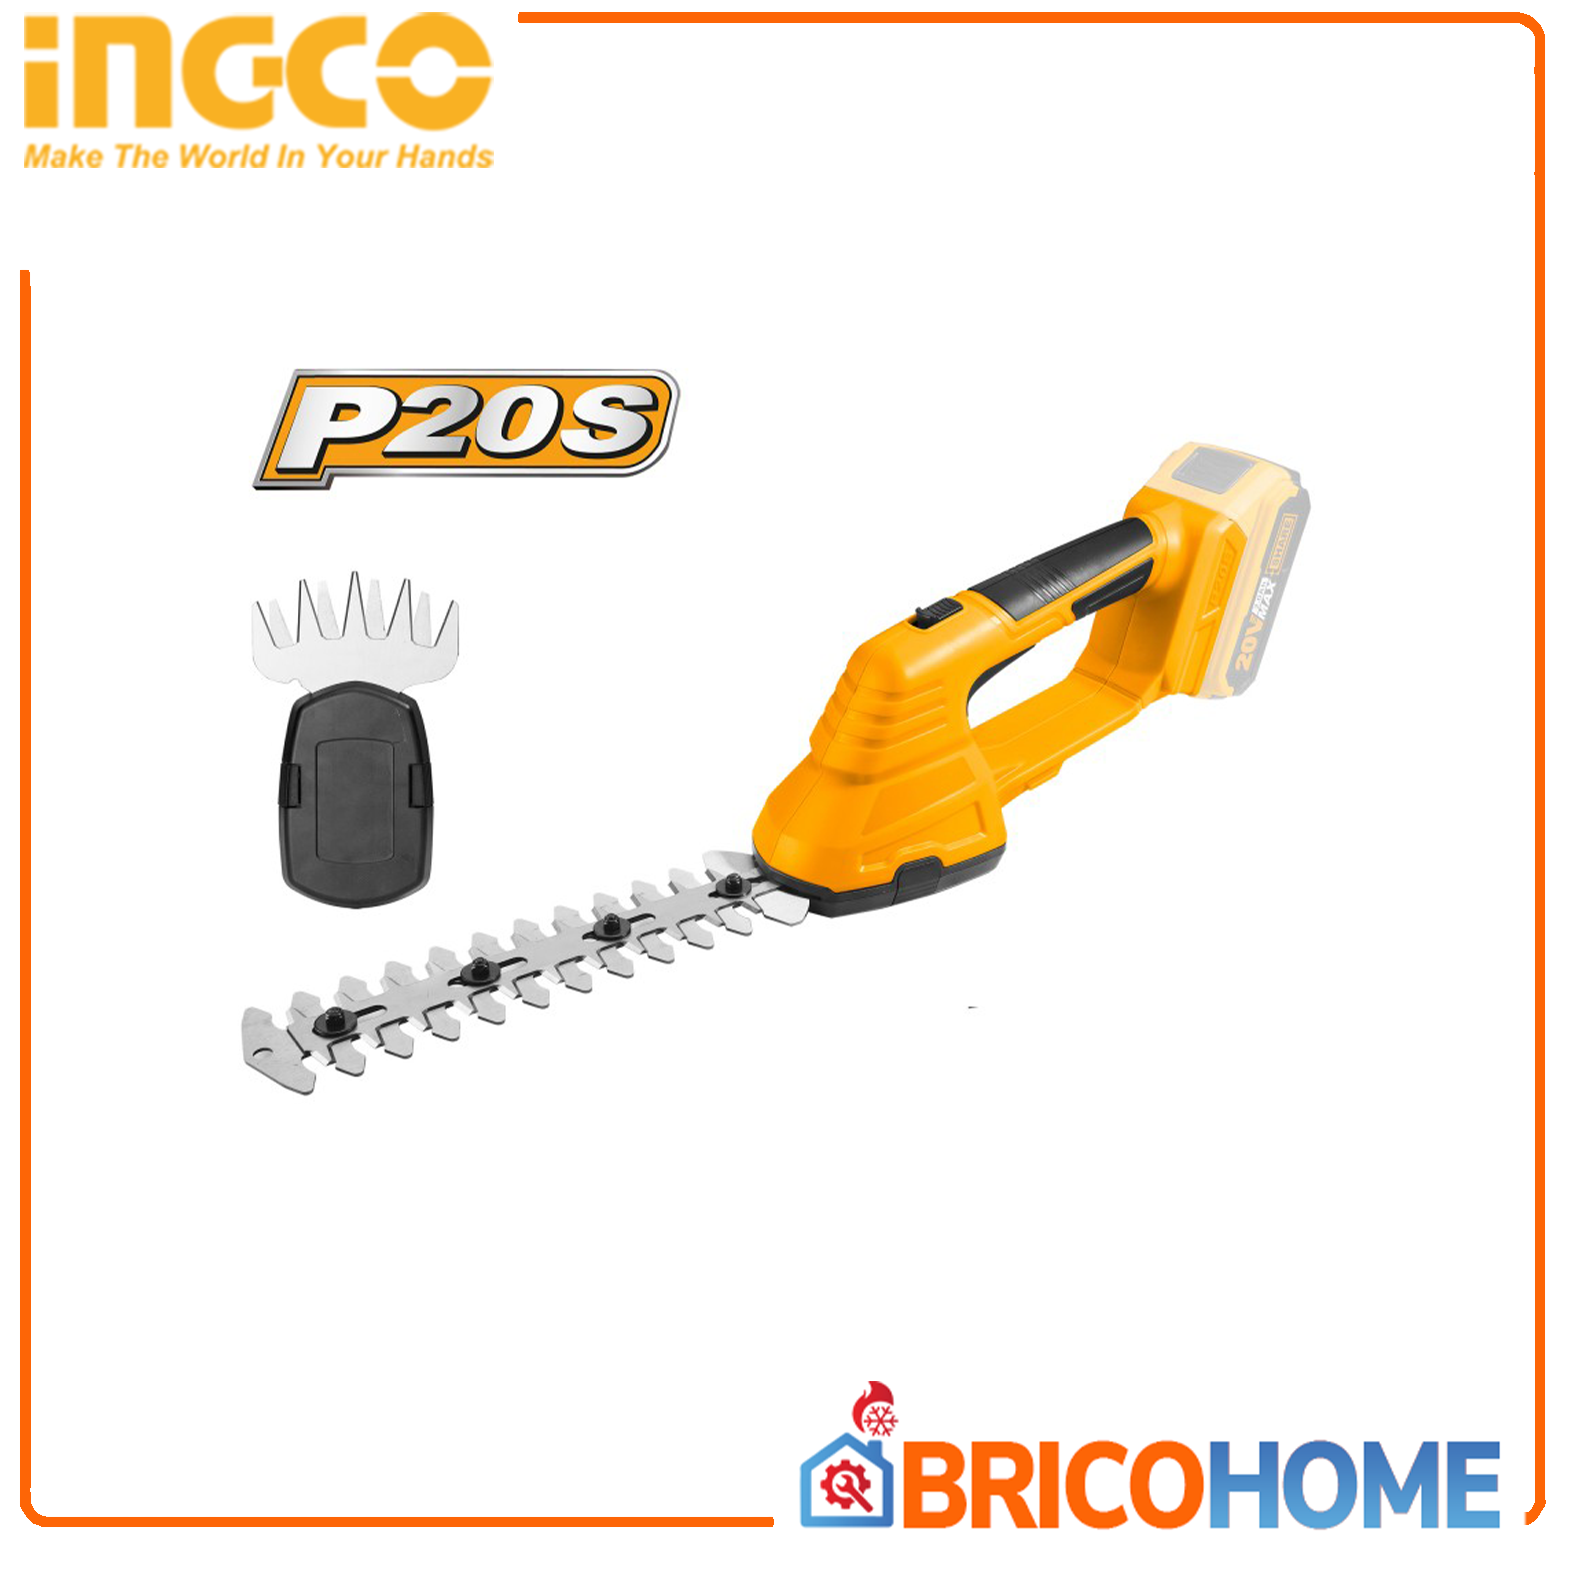 20V battery hedge trimmer - Naked INGCO (machine body only) 